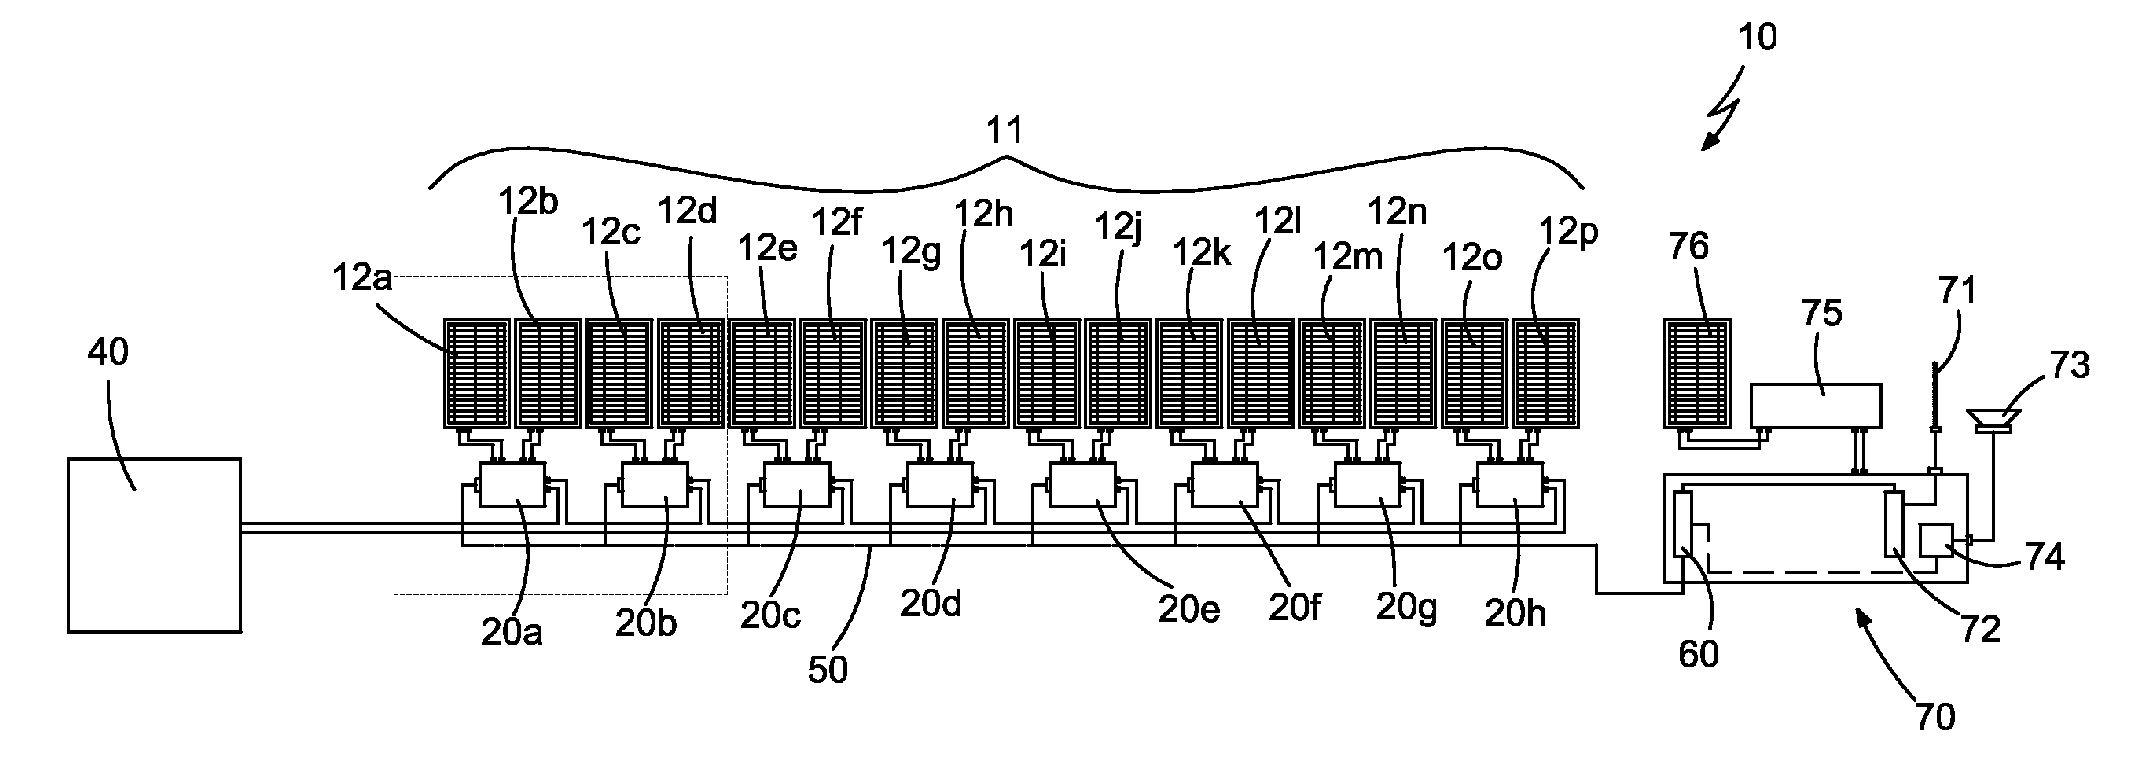 Apparatus and method for managing and conditioning photovoltaic power harvesting systems